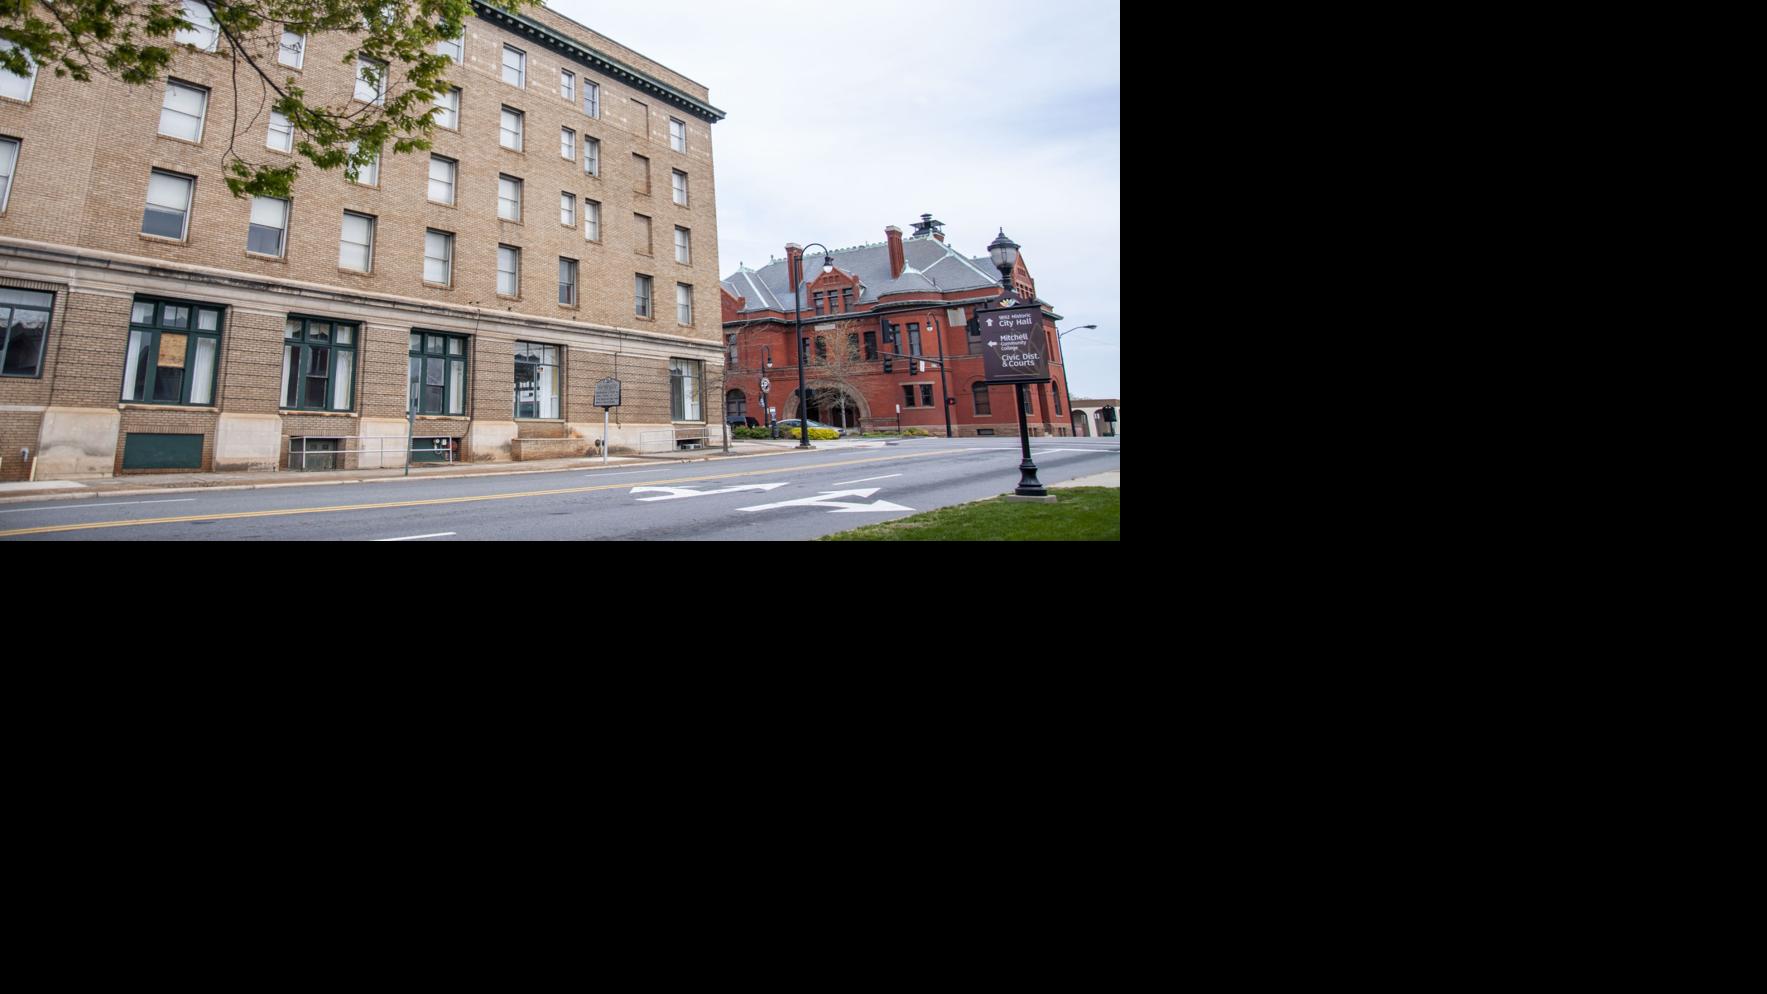 Council To Consider Further Steps With The Vance Hotel Local News